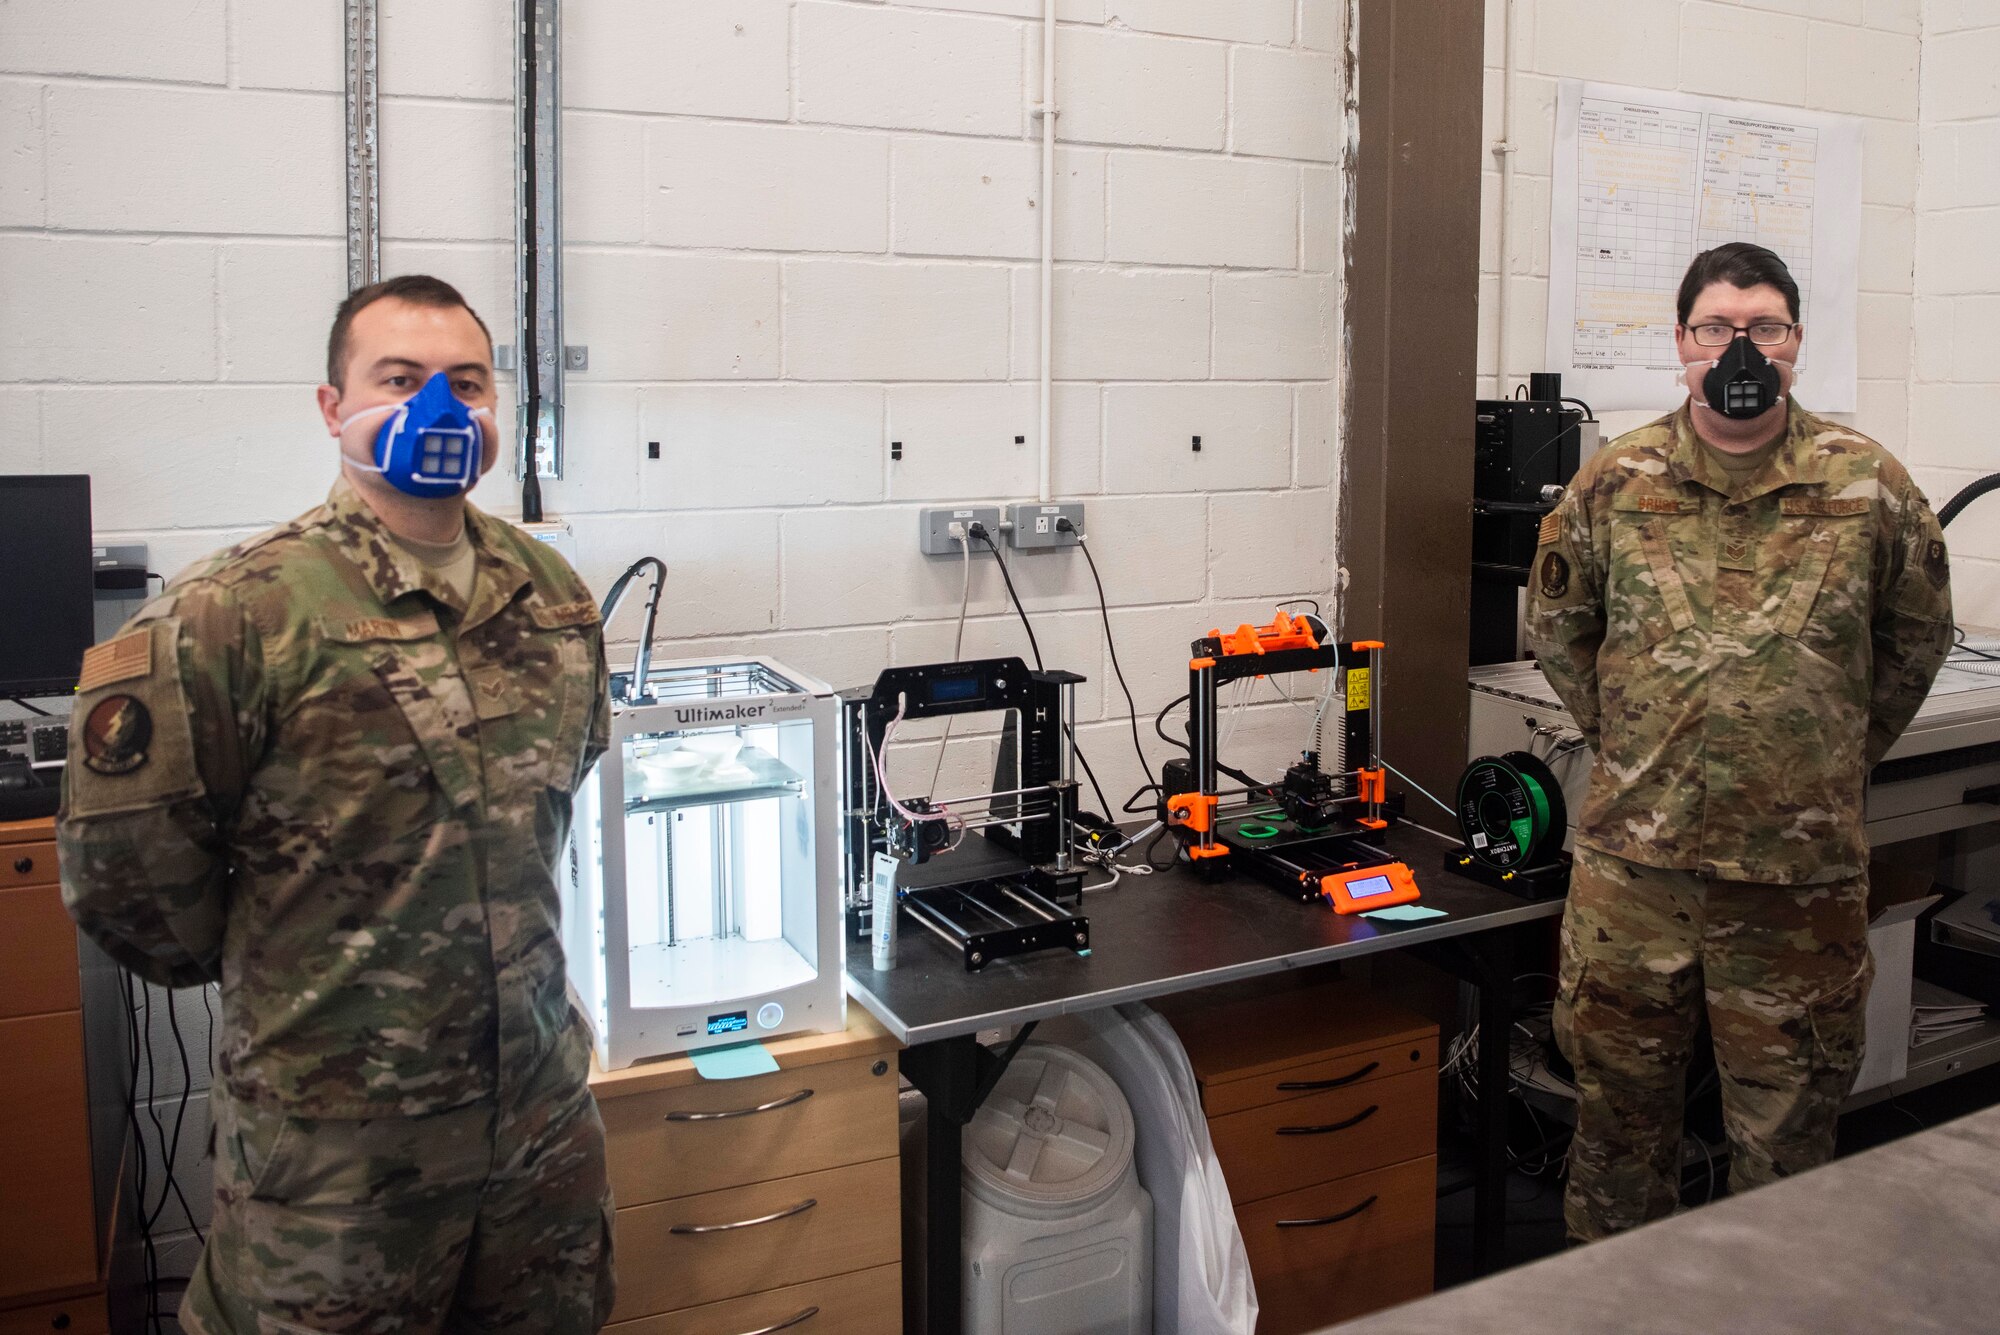 From left to right, U.S. Air Force’s Senior Airman Carl Martin, 352d Special Operations Aircraft Maintenance Squadron support technician, and Staff Sgt. Alex Bruce, 352d SOAMXS MC-130J equipment custodian, stand in front of the 3D printers they use to construct plastic masks, April 27, 2020, at RAF Mildenhall, England. Bruce and Martin have produced more than 100 masks for squadron members in the past month, following DoD health guidelines on the use of cloth face coverings by using 3D printers to engineer face masks in an effort to combat the spread of Coronavirus. The 352d Special Operations Wing is the sole Air Force special operations unit in the European Theater. (U.S. Air Force photo by Airman 1st Class Joseph Barron)